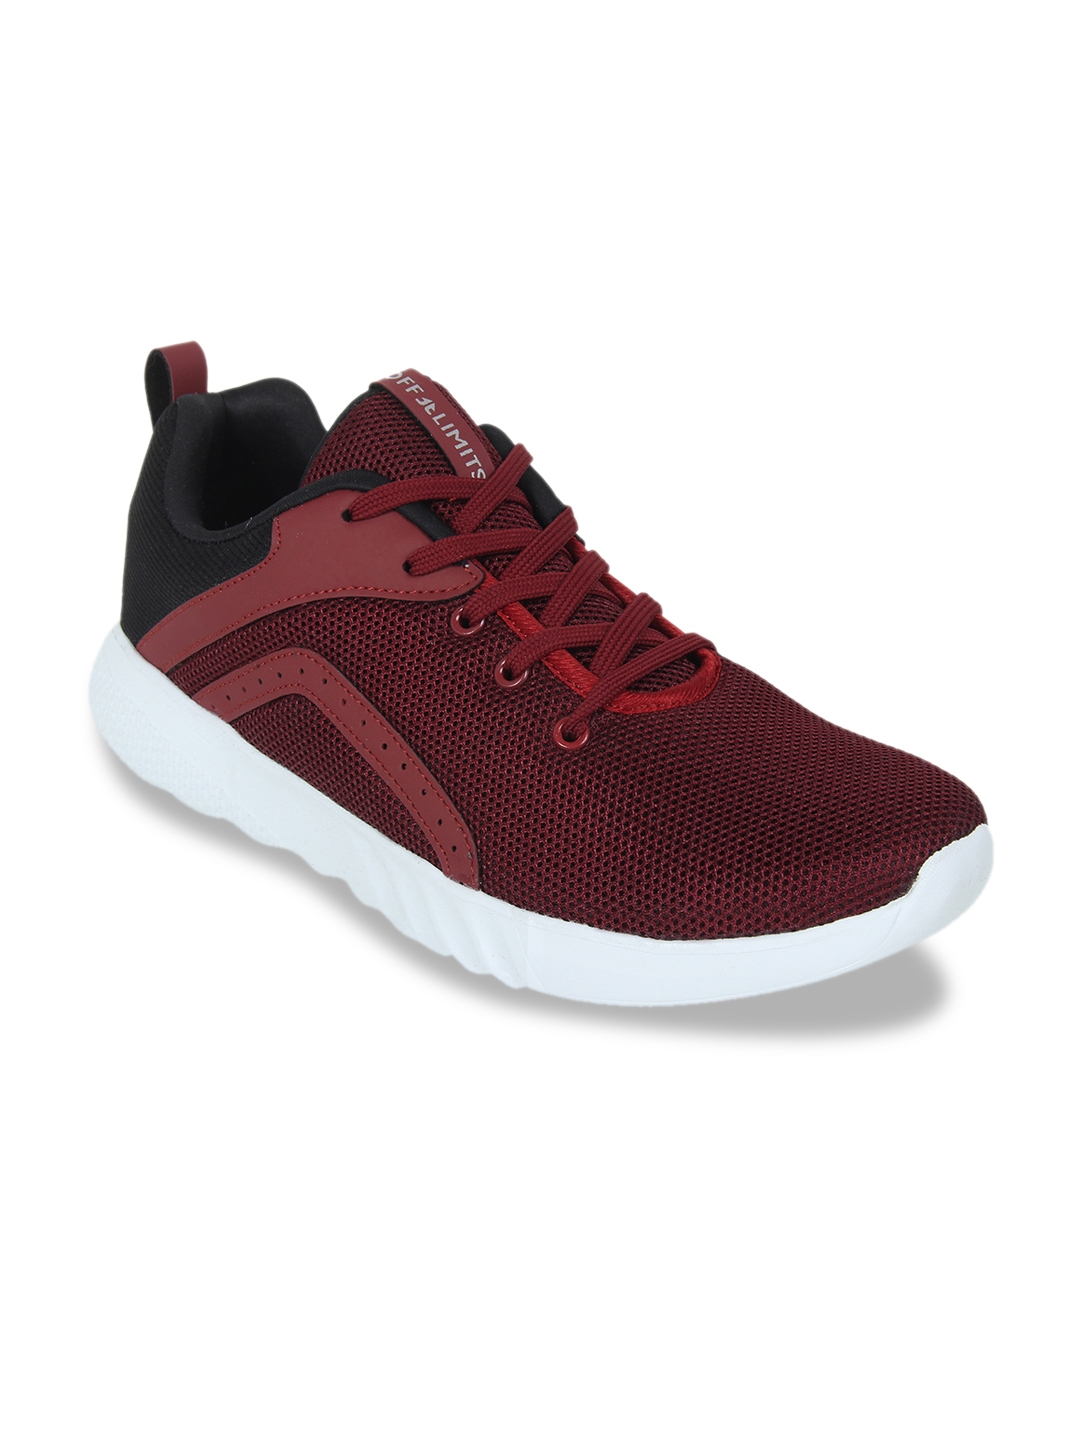 Buy OFF LIMITS Men Maroon & Black Mesh Running Shoes - Sports Shoes for ...